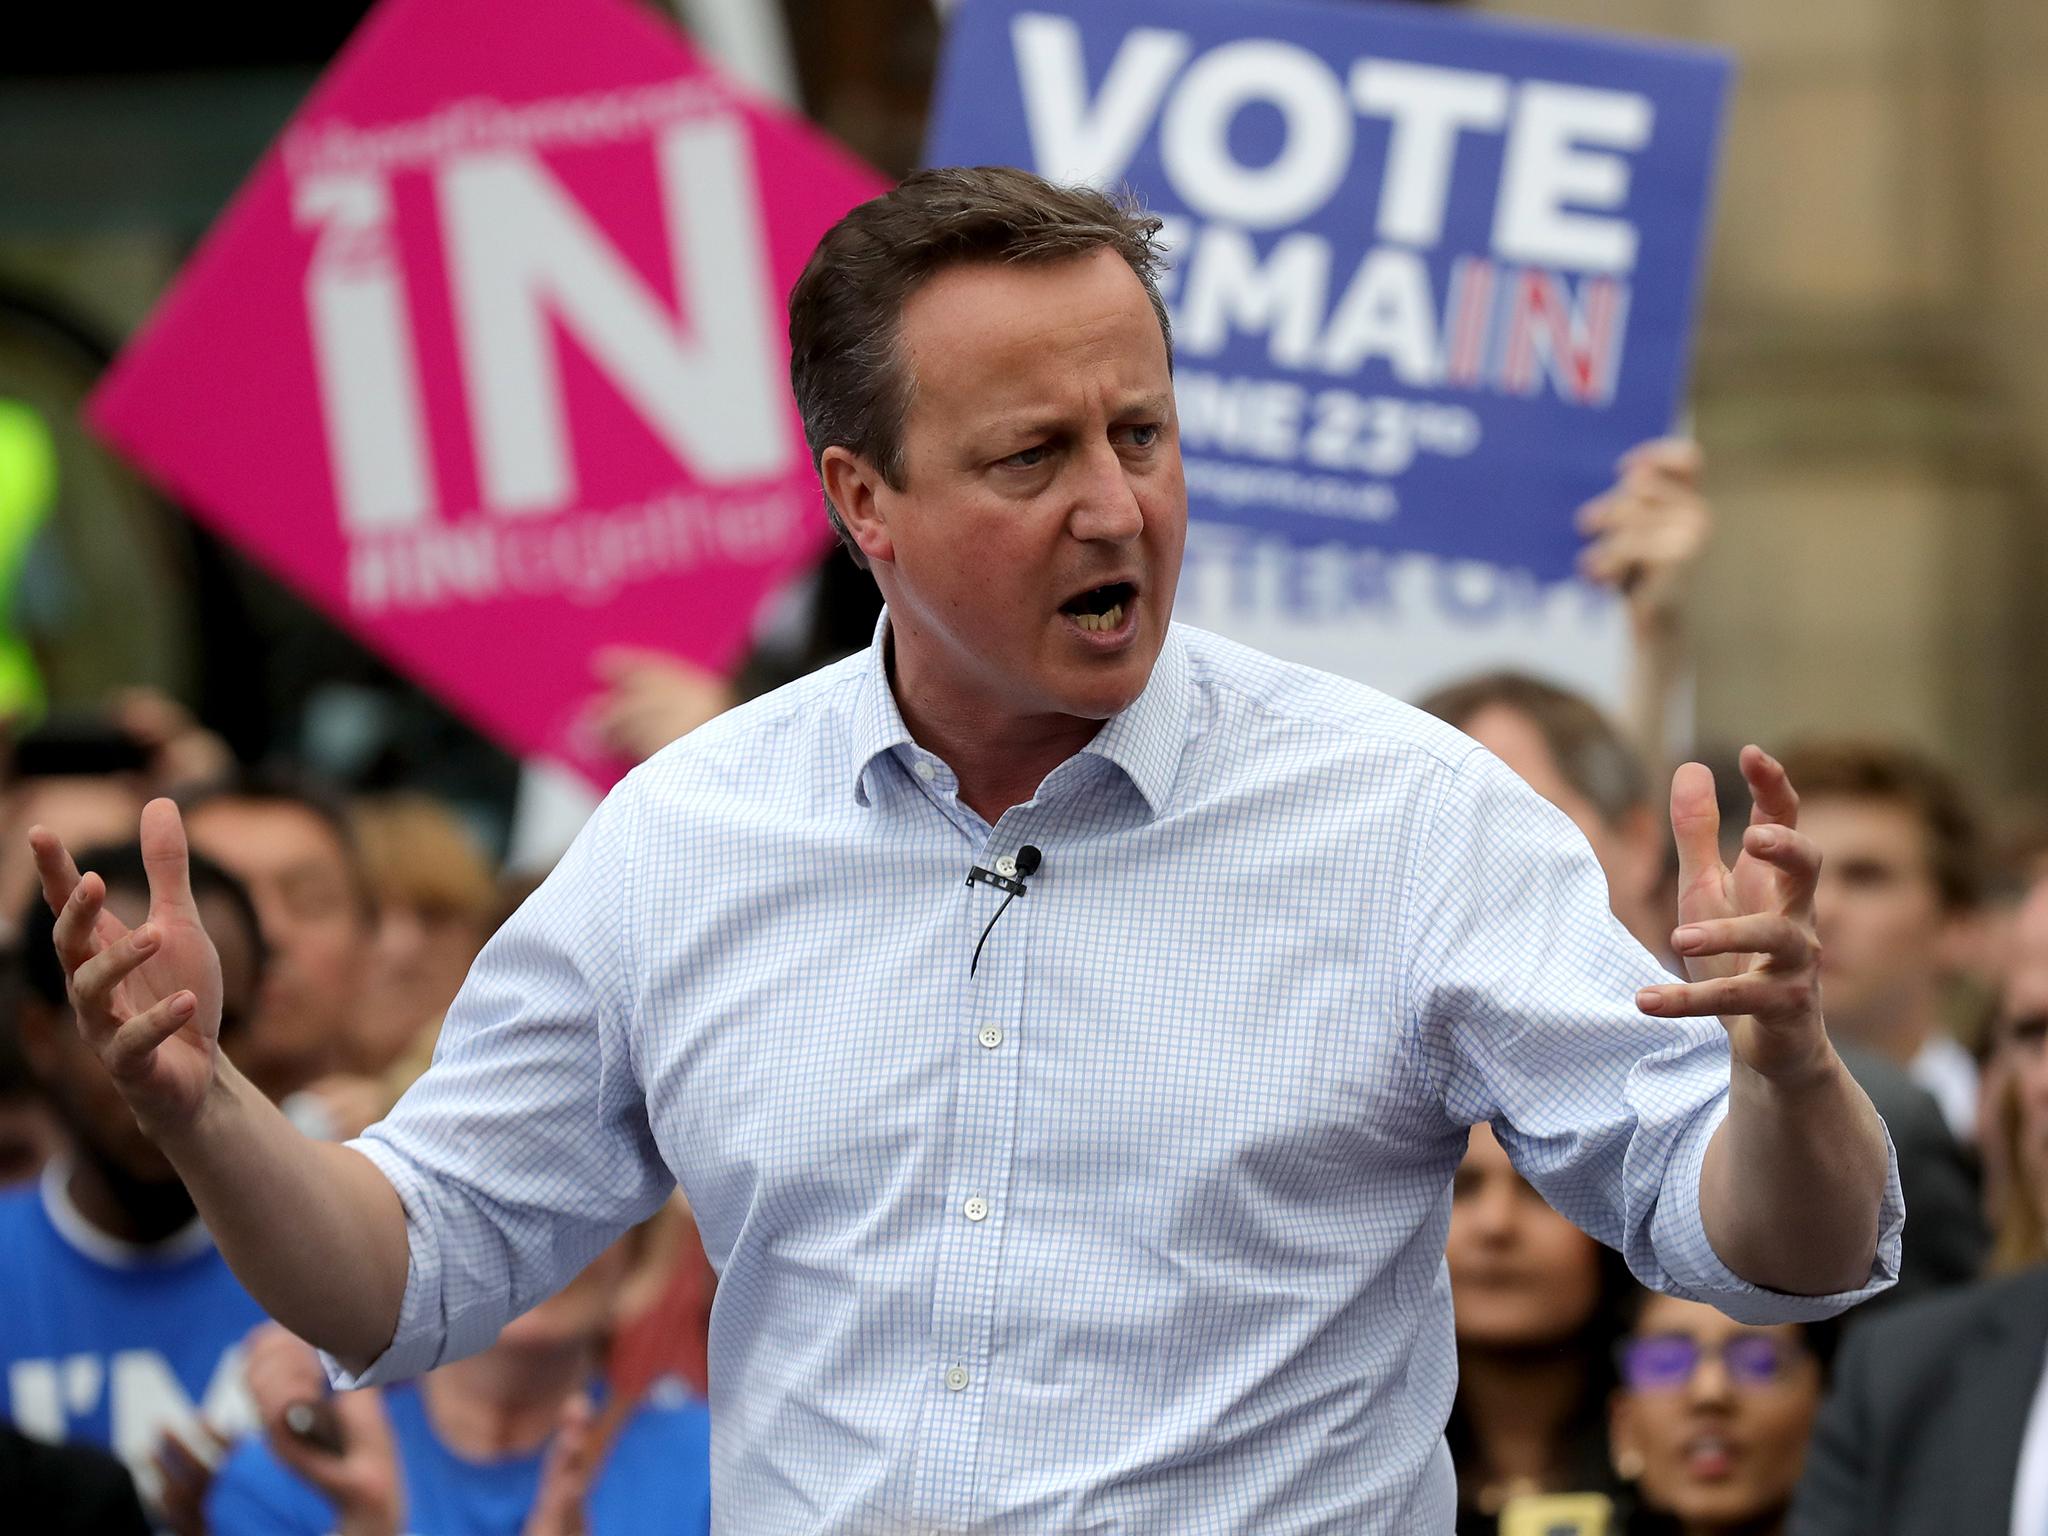 There was speculation about David Cameron's future